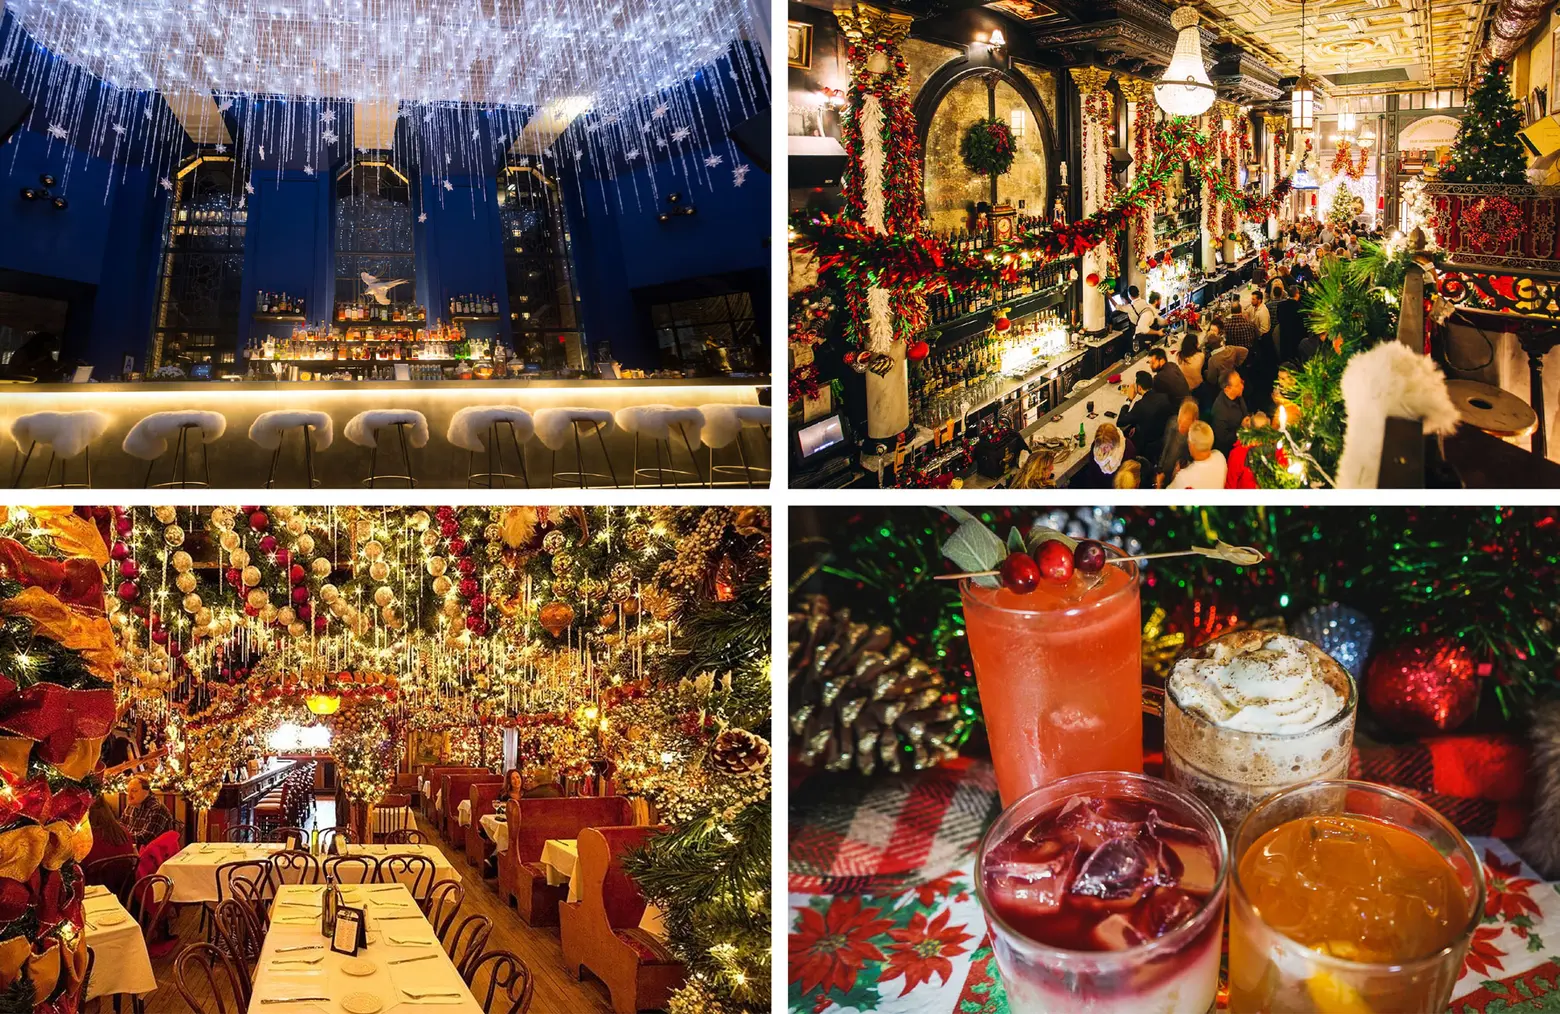 NYC’s 11 most festive bars and restaurants